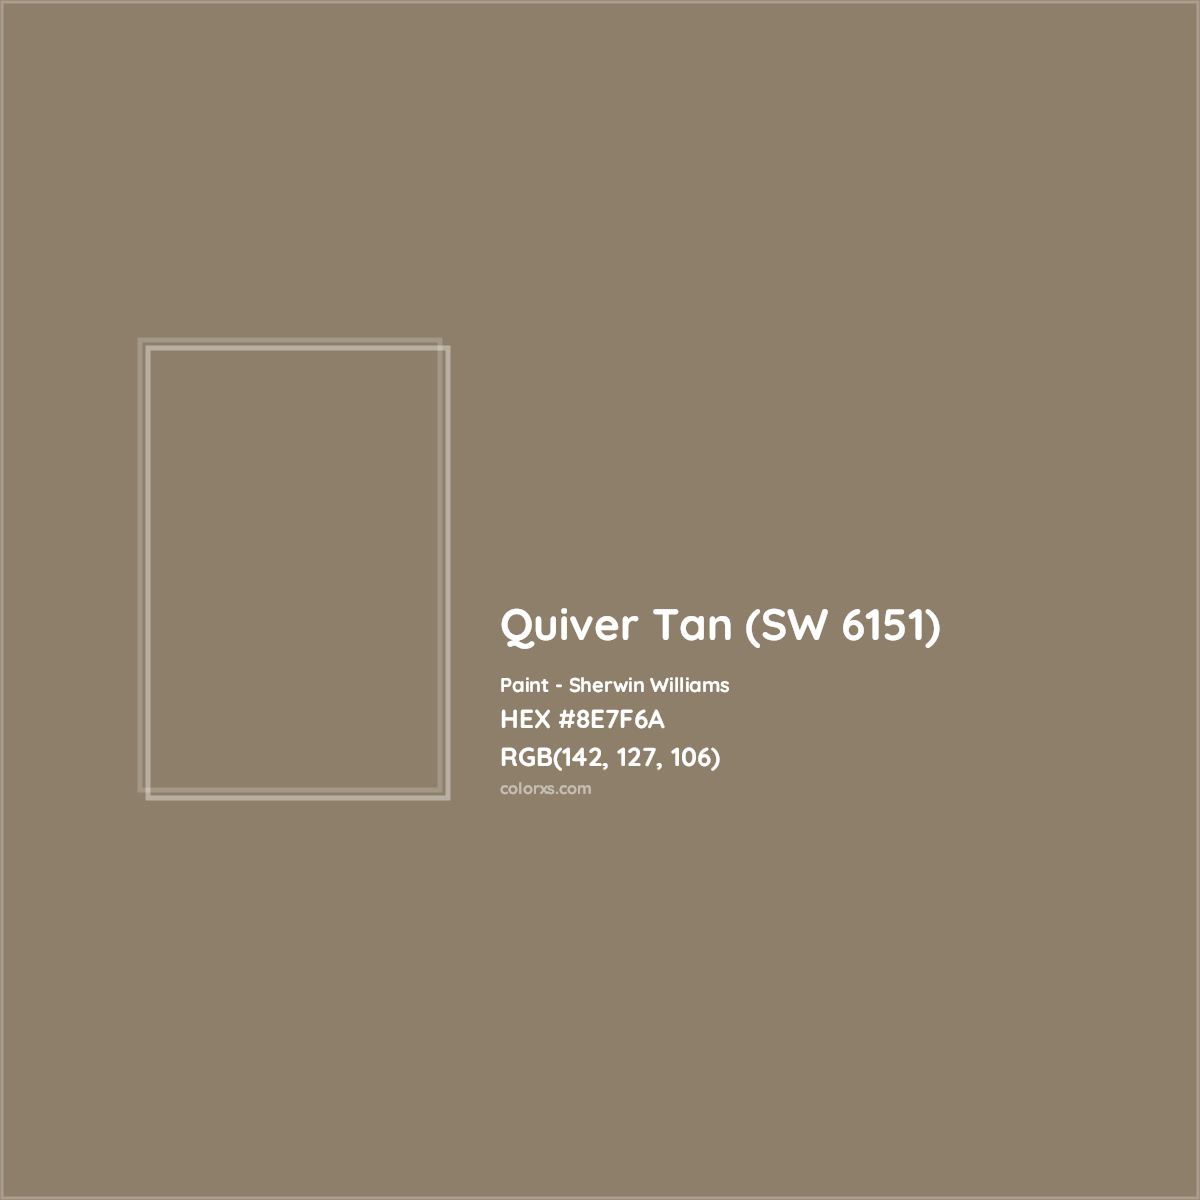 HEX #8E7F6A Quiver Tan (SW 6151) Paint Sherwin Williams - Color Code